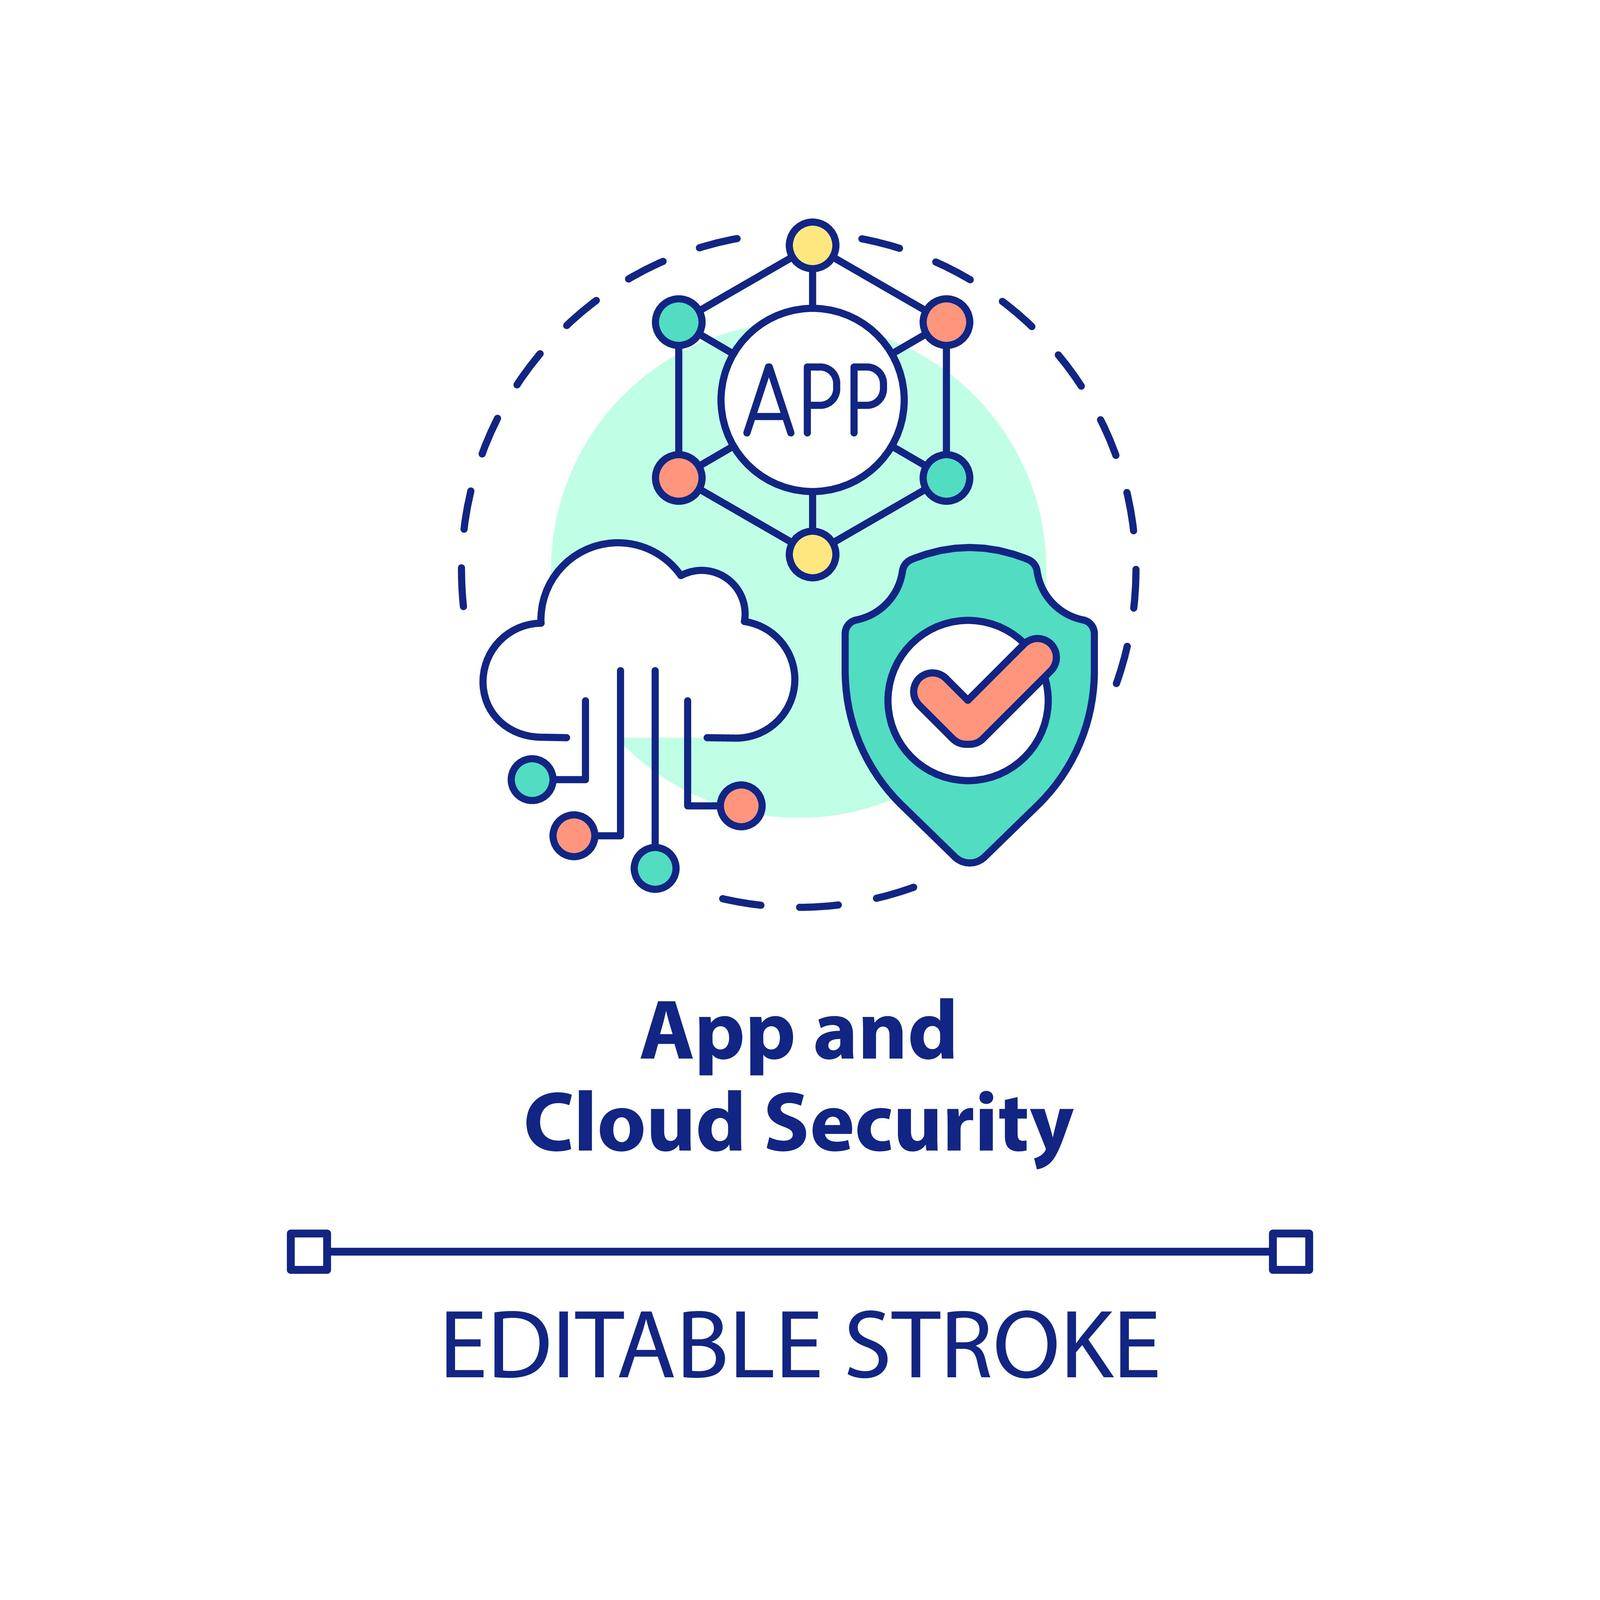 App and cloud security concept icon by bsd